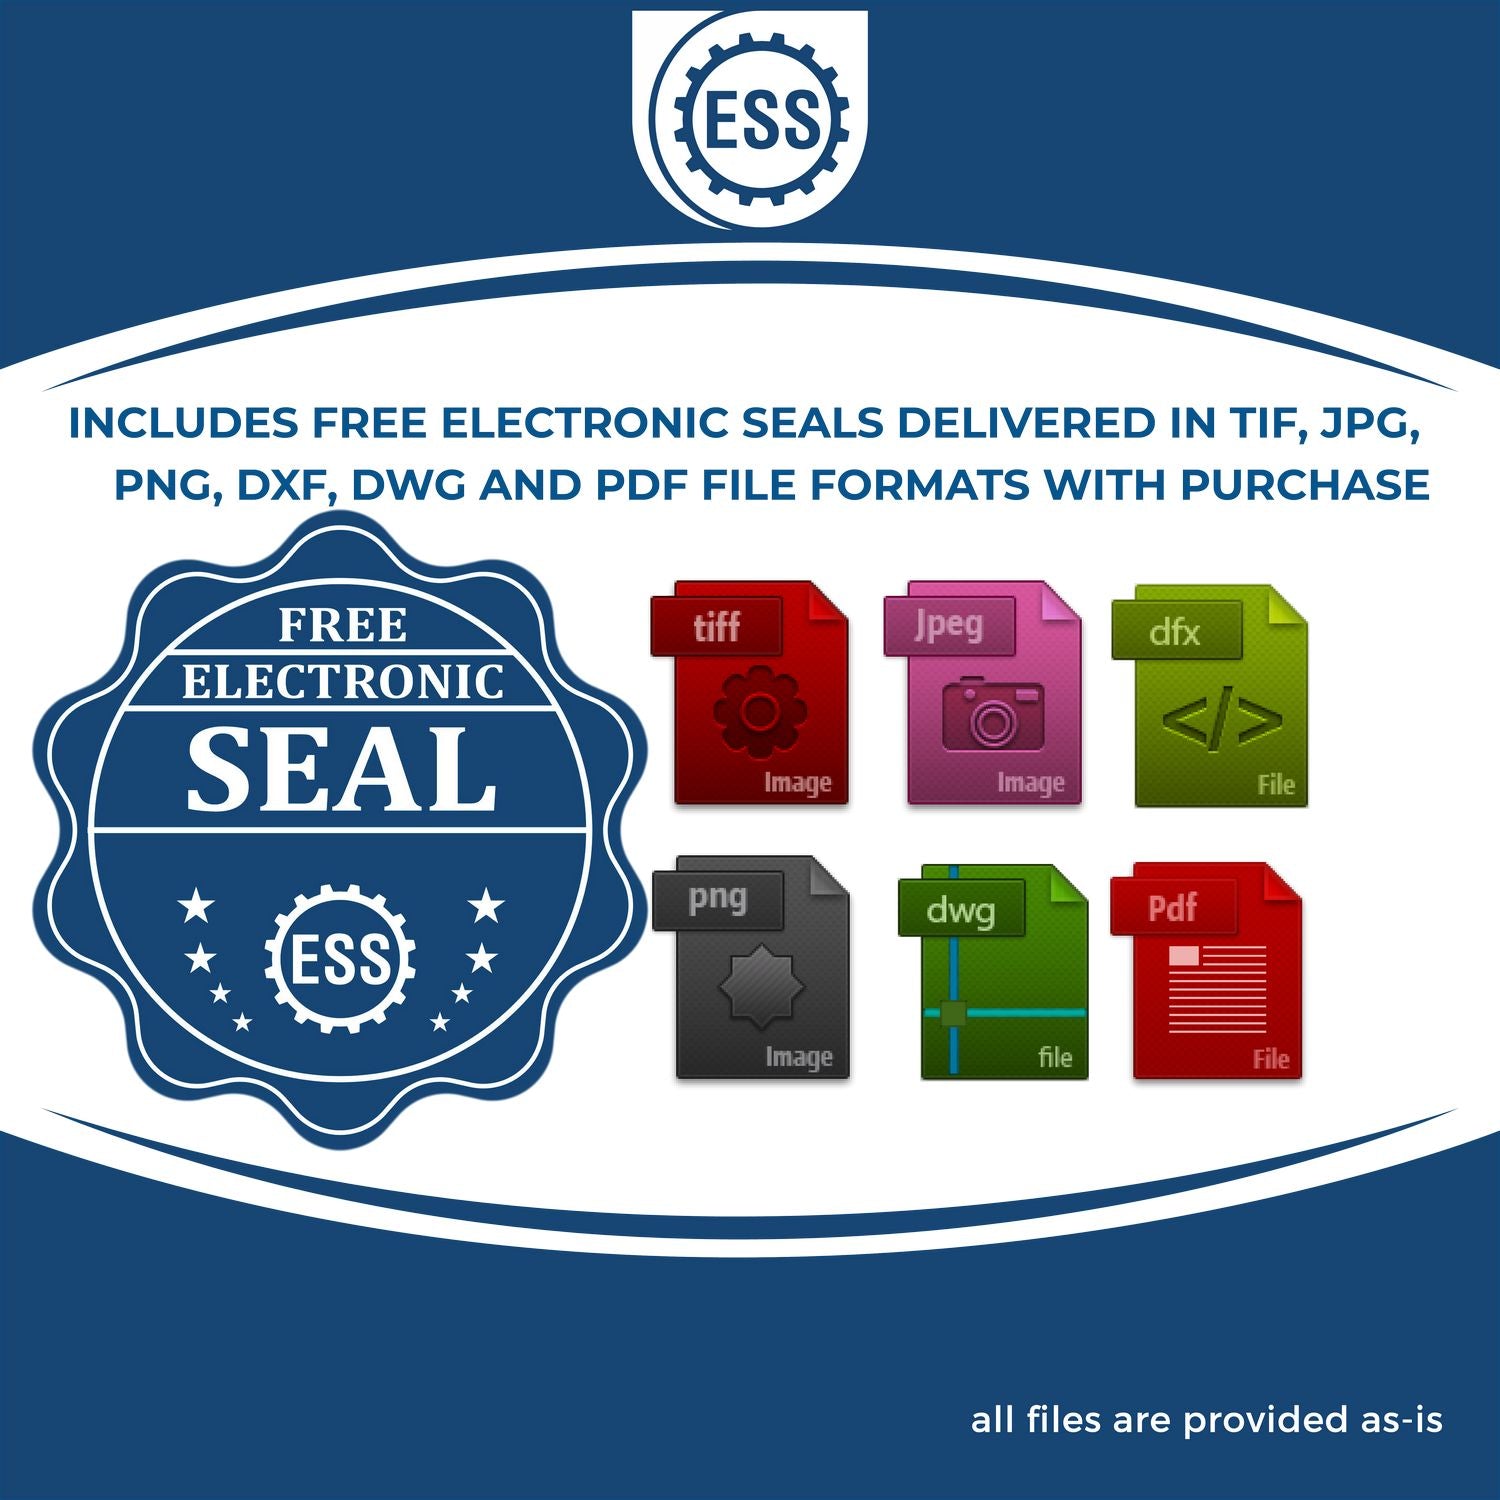 An infographic for the free electronic seal for the Slim Pre-Inked Virginia Architect Seal Stamp illustrating the different file type icons such as DXF, DWG, TIF, JPG and PNG.